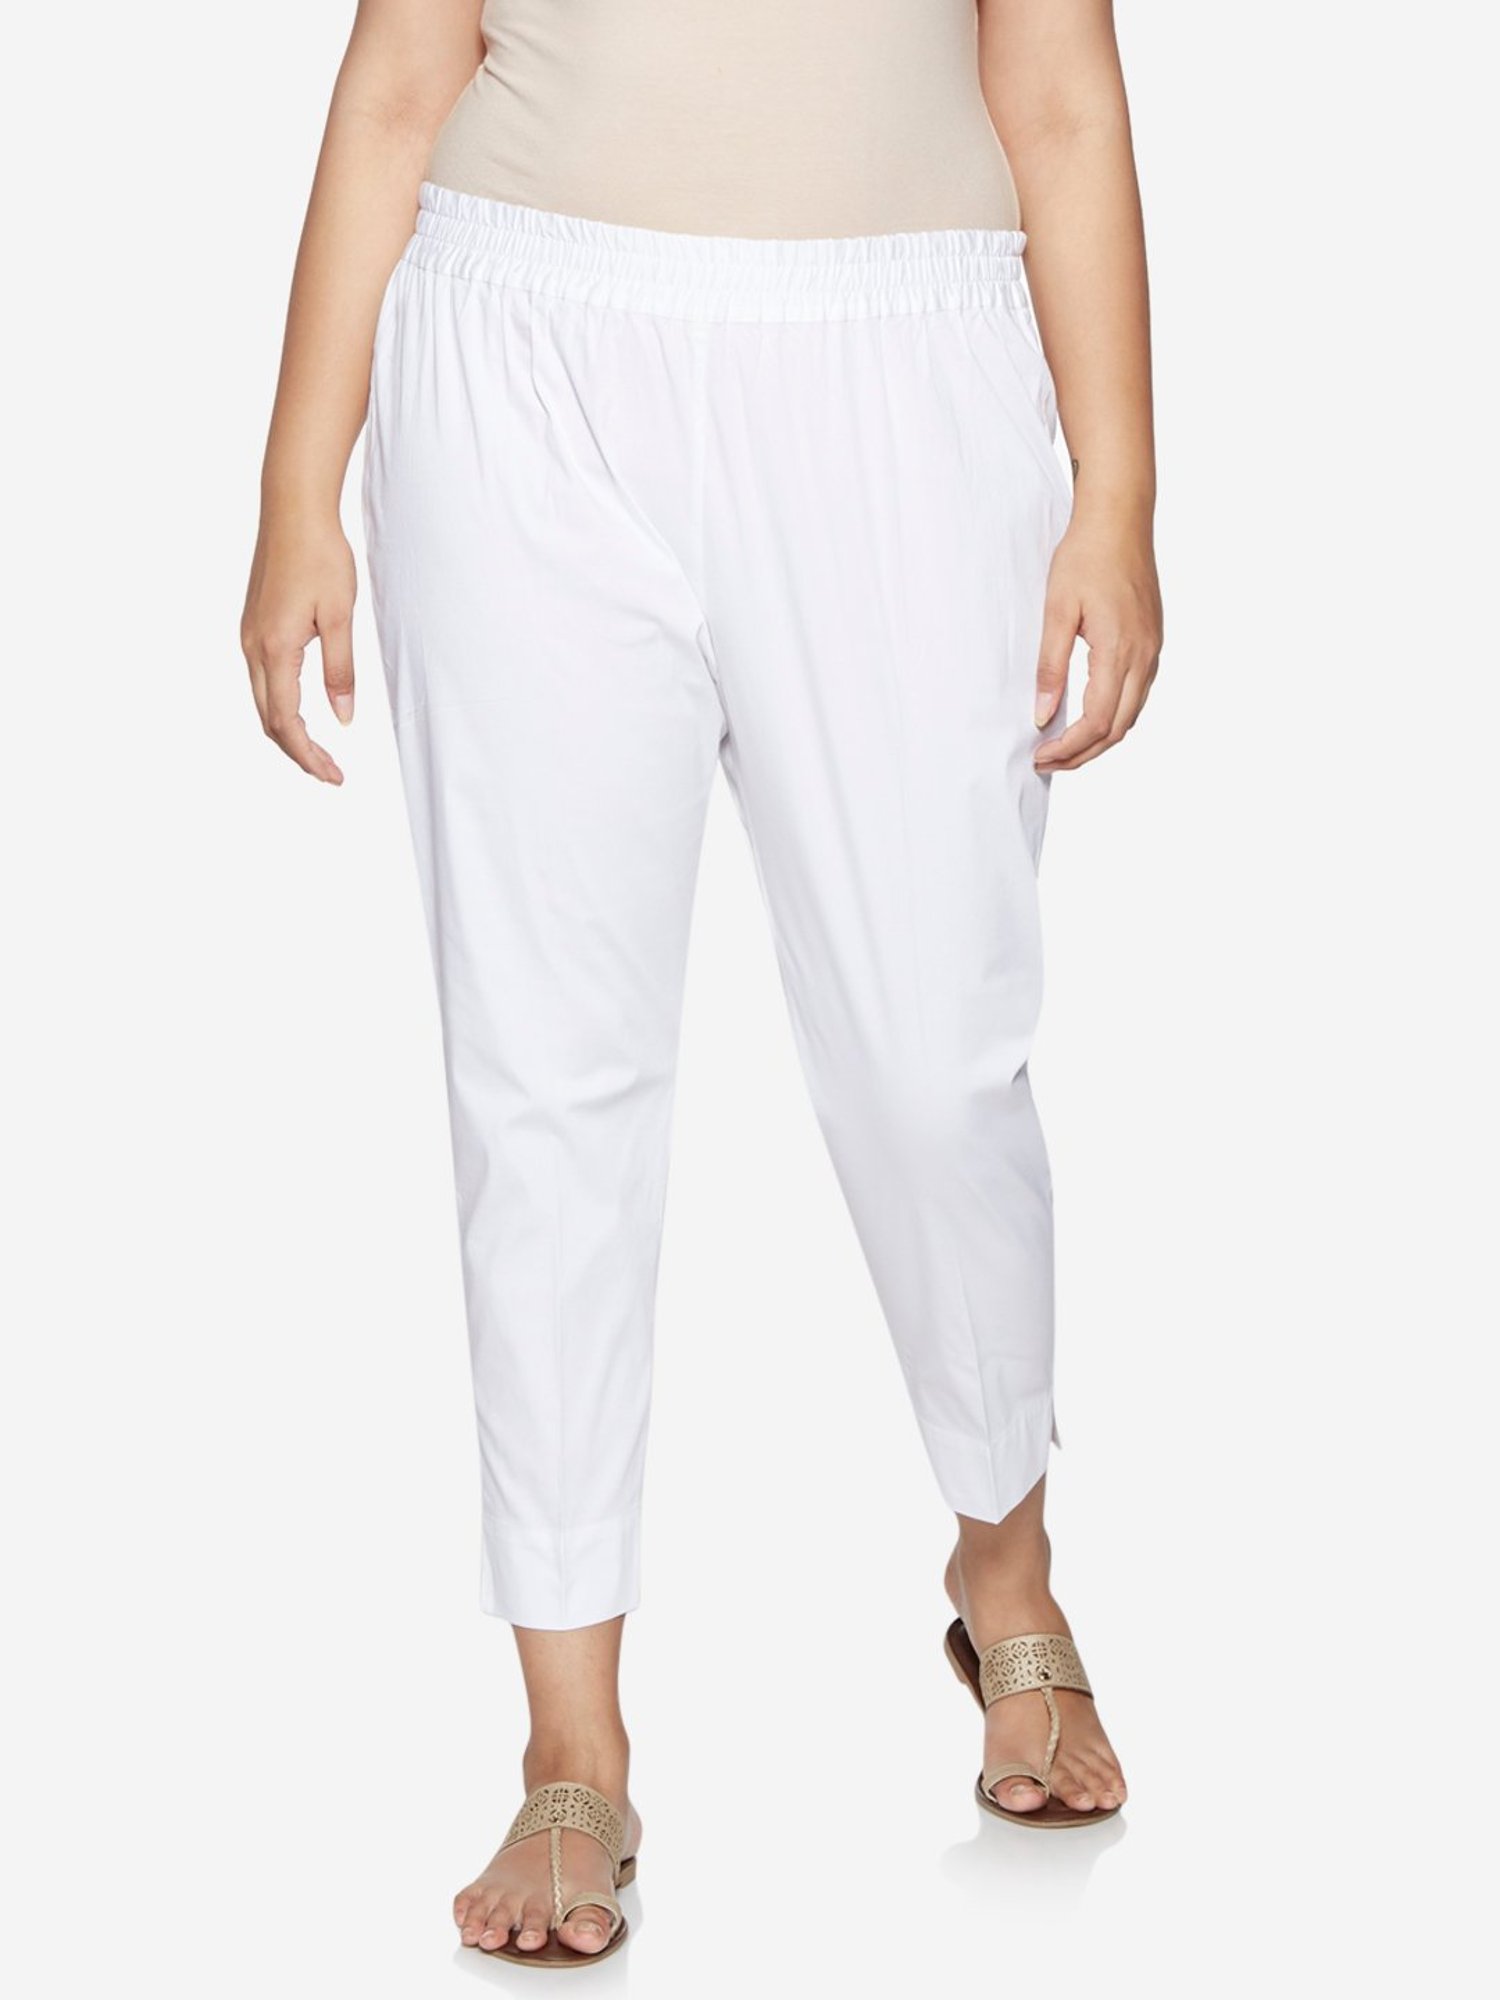 LASTINCH White Stretch Pants  Sizes available up to 8XL